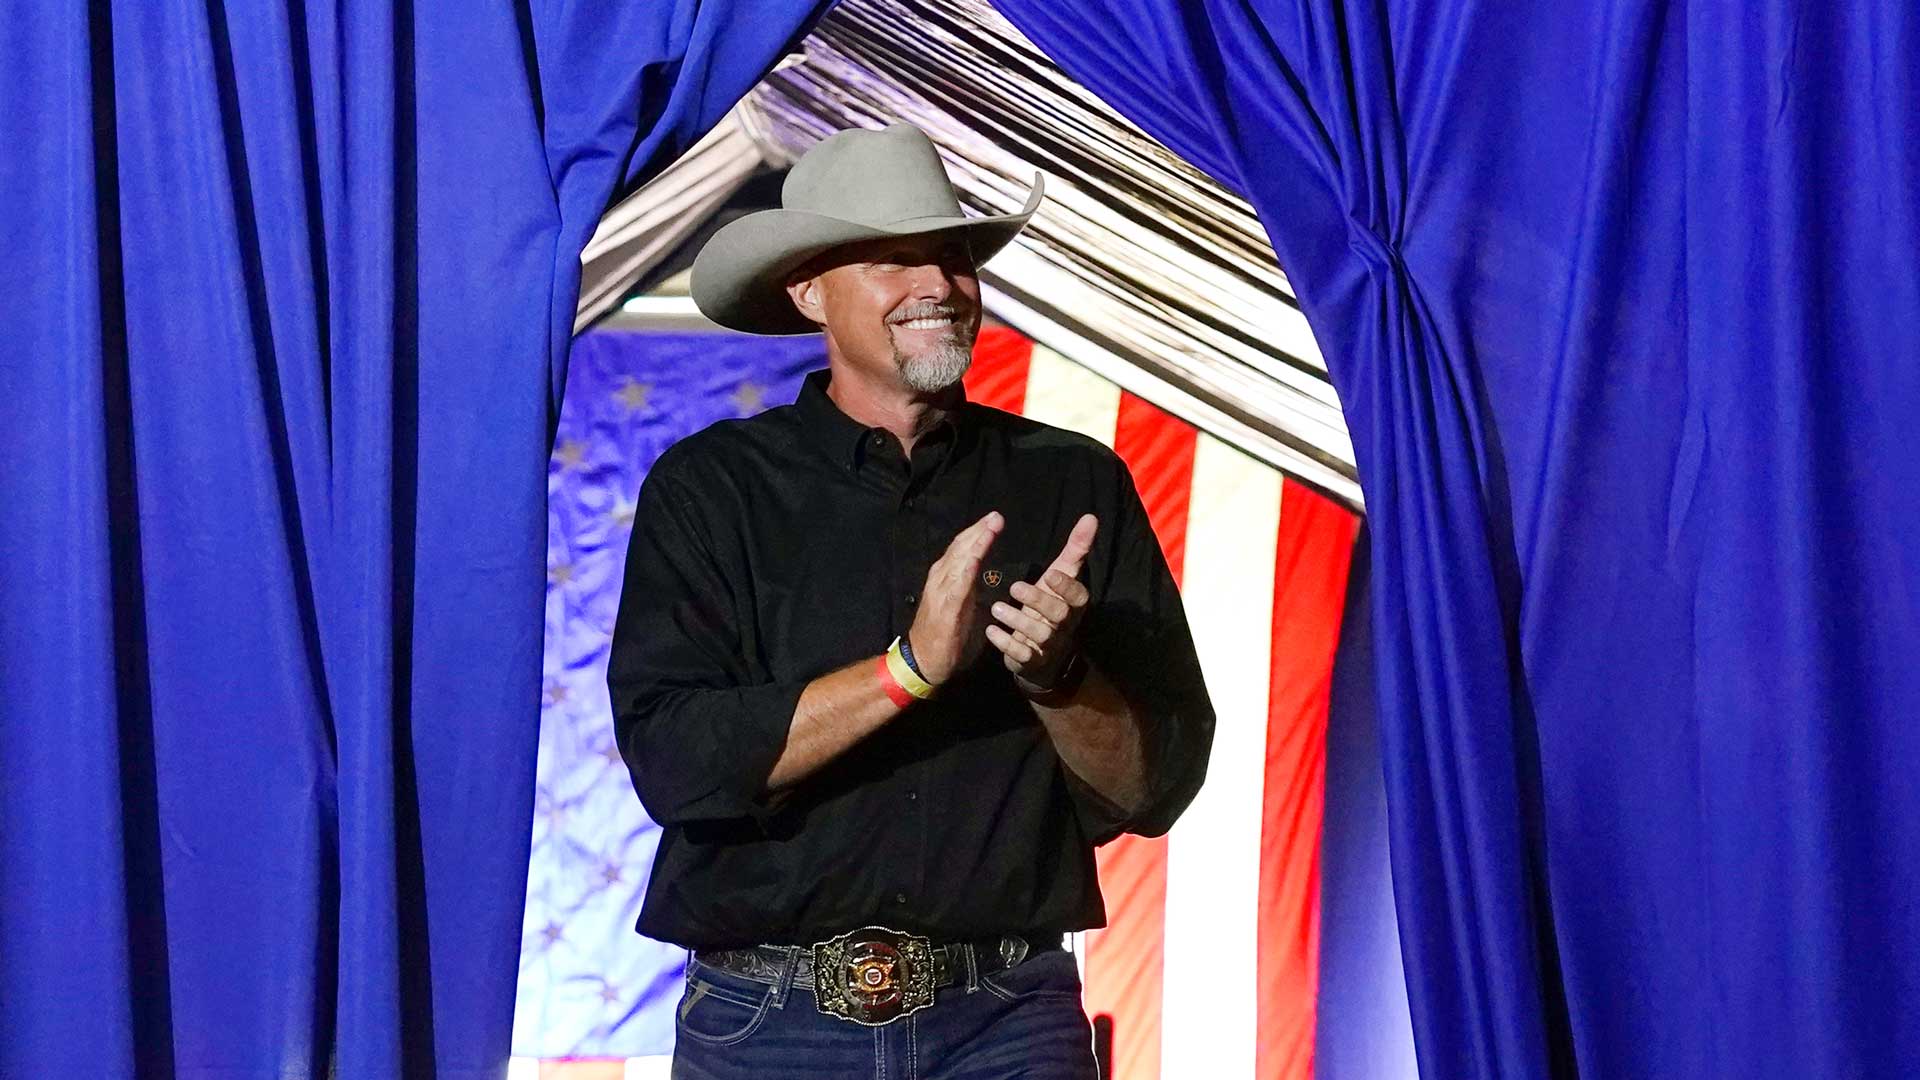 Pinal County sheriff Mark Lamb applauds as he walks on stage at a Save America Rally Friday, July 22, 2022, in Prescott, Ariz.